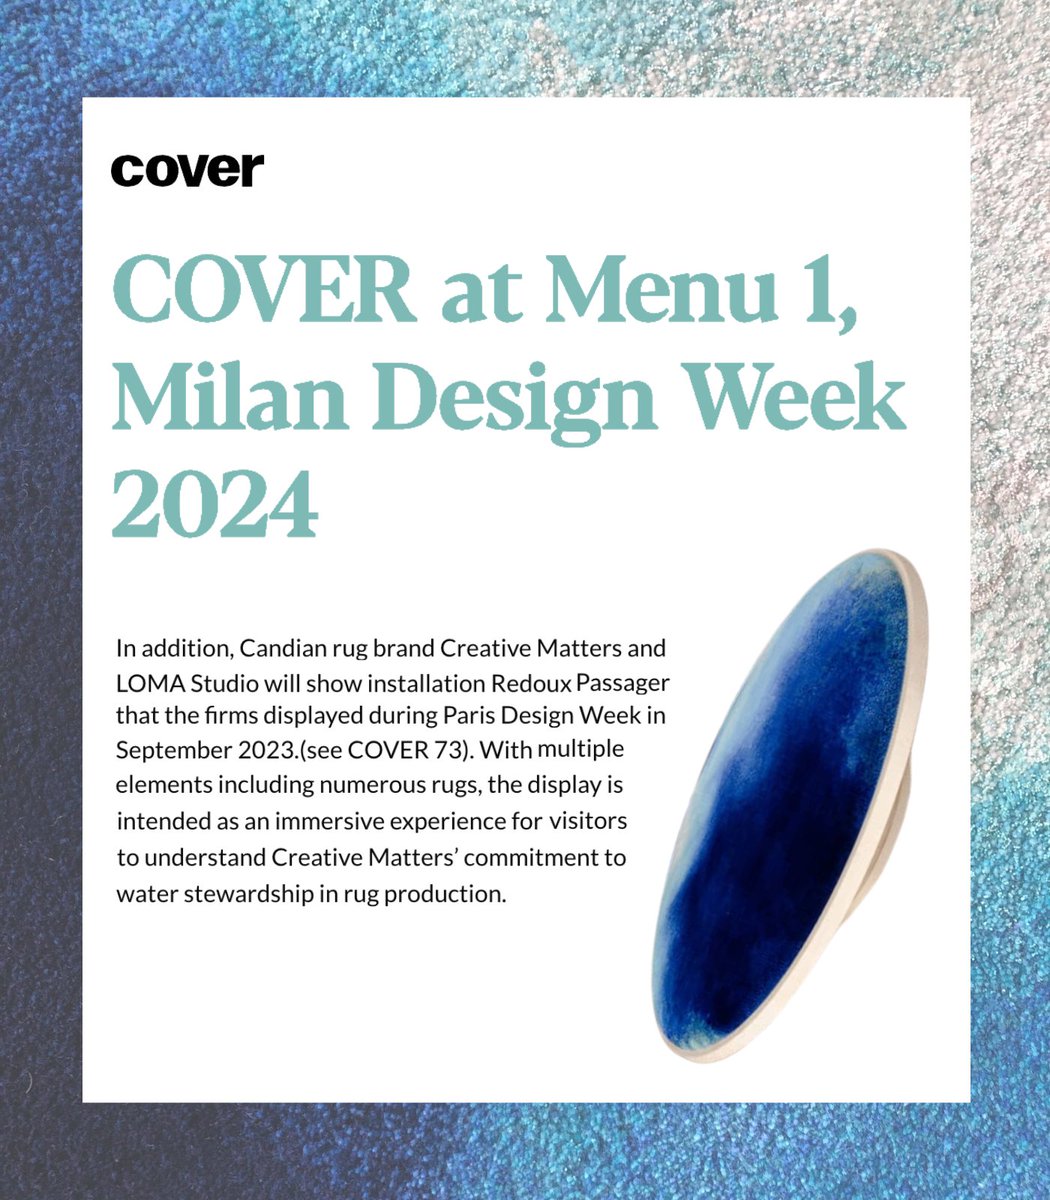 All eyes on Creative Matters' Redoux Passager. @COVERMag2005 has featured the installation, made in collaboration with LOMA Studio, as a major highlight for Milan Design Week.
⁠
cover-magazine.com/2024/04/11/the…

cover-magazine.com/2024/04/02/cov…
⁠
#CreativeMatters #MilanDesignWeek #COVERMagazine